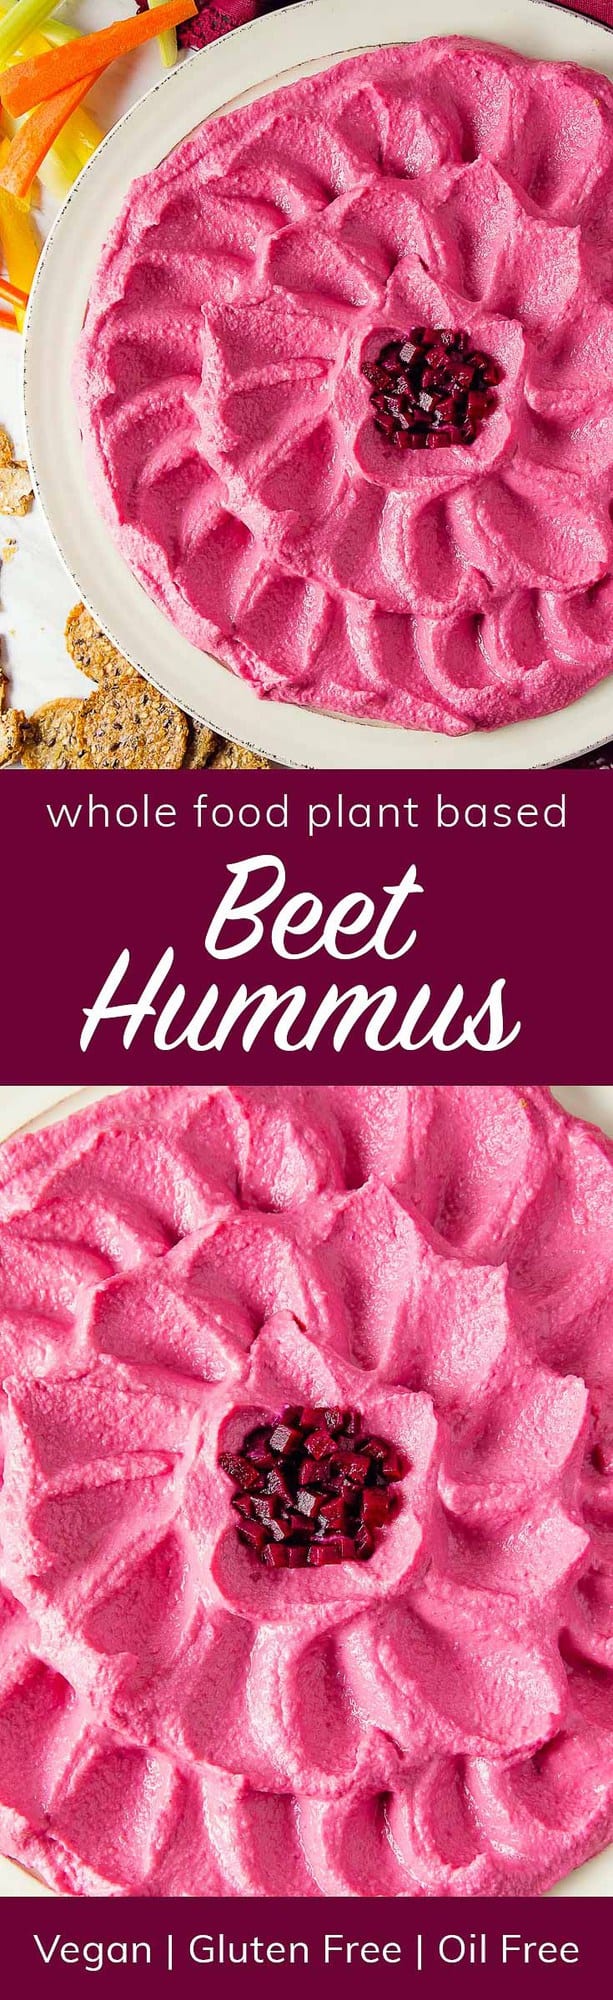 Beet Hummus, vegan, vegetarian, whole food plant based, gluten free, recipe, wfpb, healthy, oil free, no refined sugar, no oil, refined sugar free, dinner, side, side dish, dairy free, dinner party, entertaining